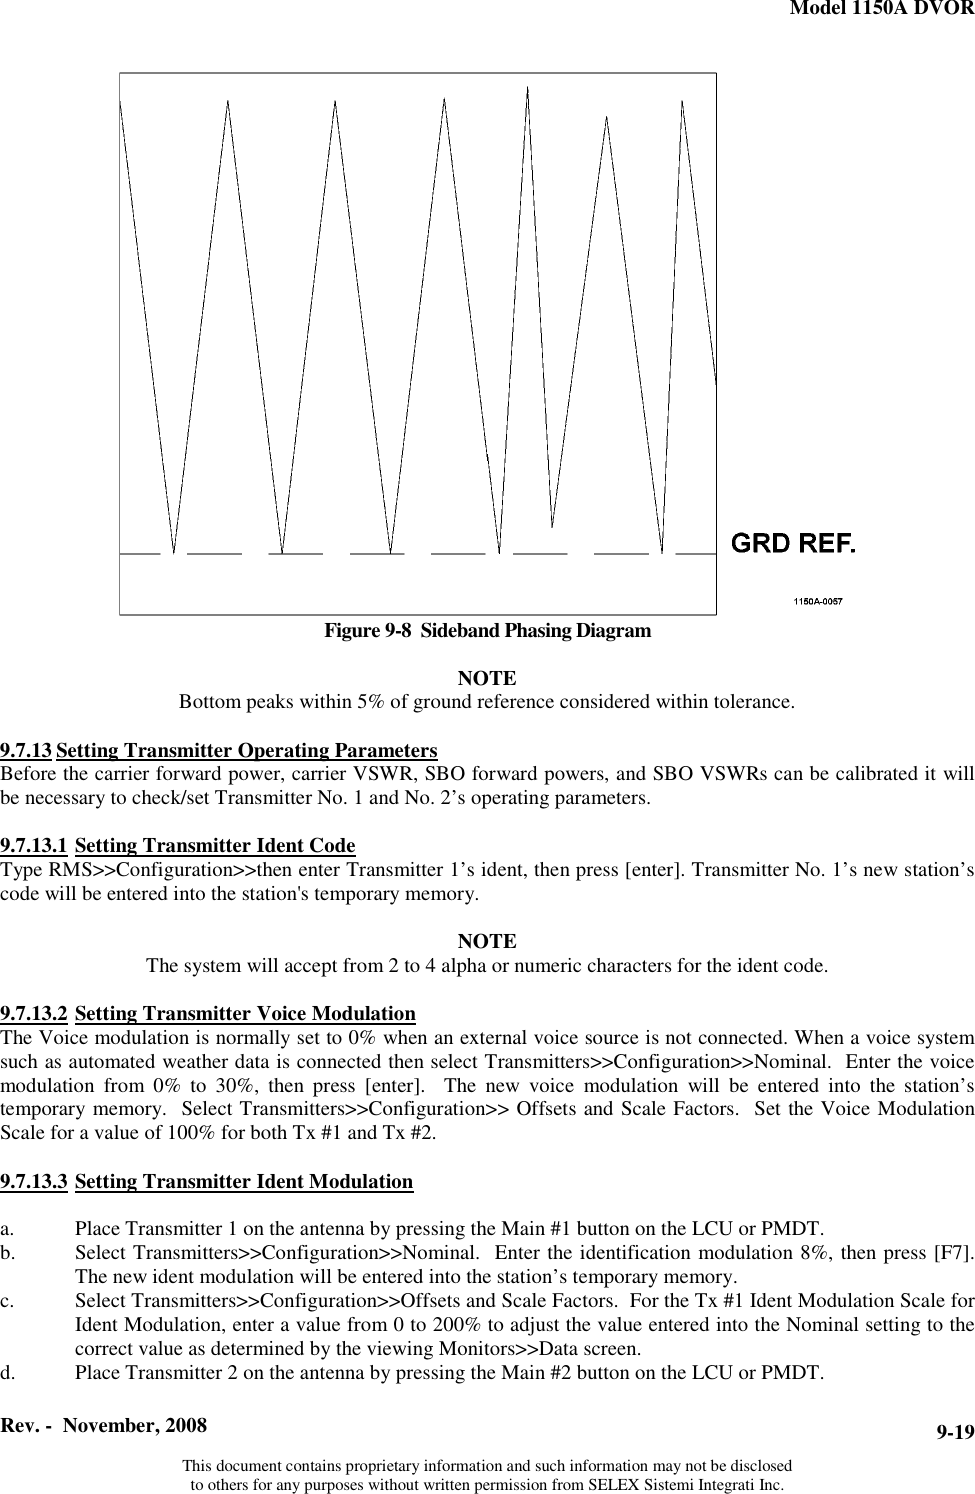 Model 1150A DVOR  Rev. -  November, 2008   This document contains proprietary information and such information may not be disclosed to others for any purposes without written permission from SELEX Sistemi Integrati Inc. 9-19Figure 9-8  Sideband Phasing Diagram  NOTE Bottom peaks within 5% of ground reference considered within tolerance.  9.7.13 Setting Transmitter Operating ParametersBefore the carrier forward power, carrier VSWR, SBO forward powers, and SBO VSWRs can be calibrated it will be necessary to check/set Transmitter No. 1 and No. 2’s operating parameters.  9.7.13.1 Setting Transmitter Ident CodeType RMS&gt;&gt;Configuration&gt;&gt;then enter Transmitter 1’s ident, then press [enter]. Transmitter No. 1’s new station’s code will be entered into the station&apos;s temporary memory.  NOTE The system will accept from 2 to 4 alpha or numeric characters for the ident code.  9.7.13.2 Setting Transmitter Voice ModulationThe Voice modulation is normally set to 0% when an external voice source is not connected. When a voice system such as automated weather data is connected then select Transmitters&gt;&gt;Configuration&gt;&gt;Nominal.  Enter the voice modulation from 0% to 30%, then press [enter].  The new voice modulation will be entered into the station’s temporary memory.  Select Transmitters&gt;&gt;Configuration&gt;&gt; Offsets and Scale Factors.  Set the Voice Modulation Scale for a value of 100% for both Tx #1 and Tx #2.  9.7.13.3 Setting Transmitter Ident Modulationa. Place Transmitter 1 on the antenna by pressing the Main #1 button on the LCU or PMDT. b. Select Transmitters&gt;&gt;Configuration&gt;&gt;Nominal.  Enter the identification modulation 8%, then press [F7].  The new ident modulation will be entered into the station’s temporary memory.   c. Select Transmitters&gt;&gt;Configuration&gt;&gt;Offsets and Scale Factors.  For the Tx #1 Ident Modulation Scale for Ident Modulation, enter a value from 0 to 200% to adjust the value entered into the Nominal setting to the correct value as determined by the viewing Monitors&gt;&gt;Data screen. d. Place Transmitter 2 on the antenna by pressing the Main #2 button on the LCU or PMDT. 